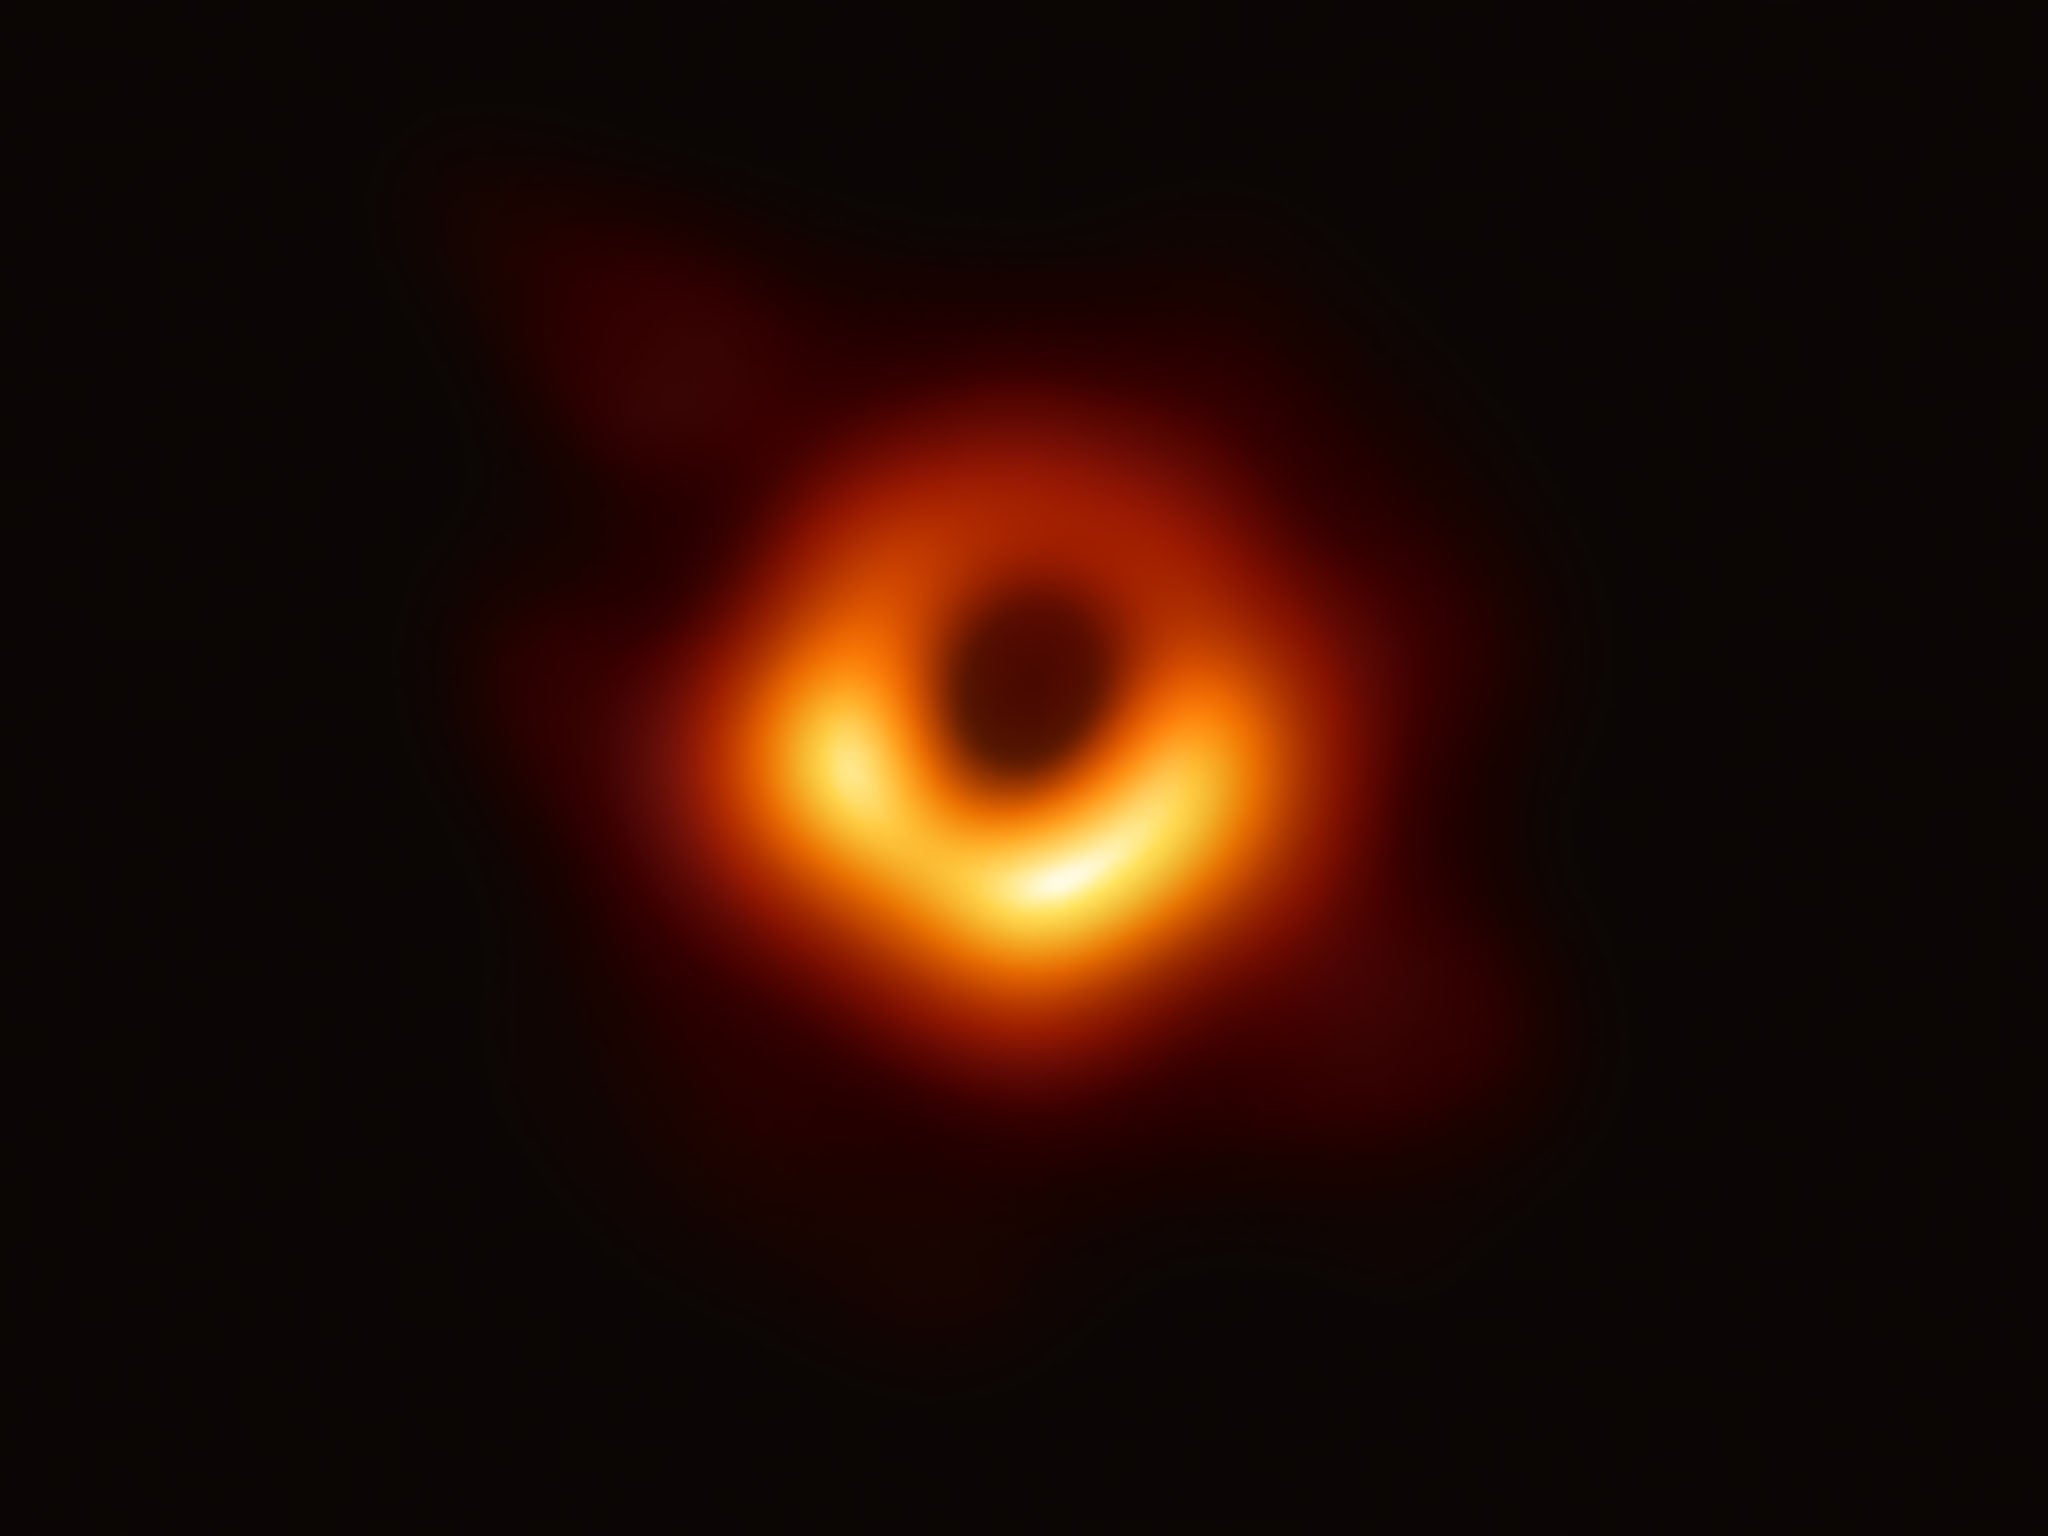 The Event Horizon Telescope, which captured a black hole in M87, is made of a network of radio observatories across four continents